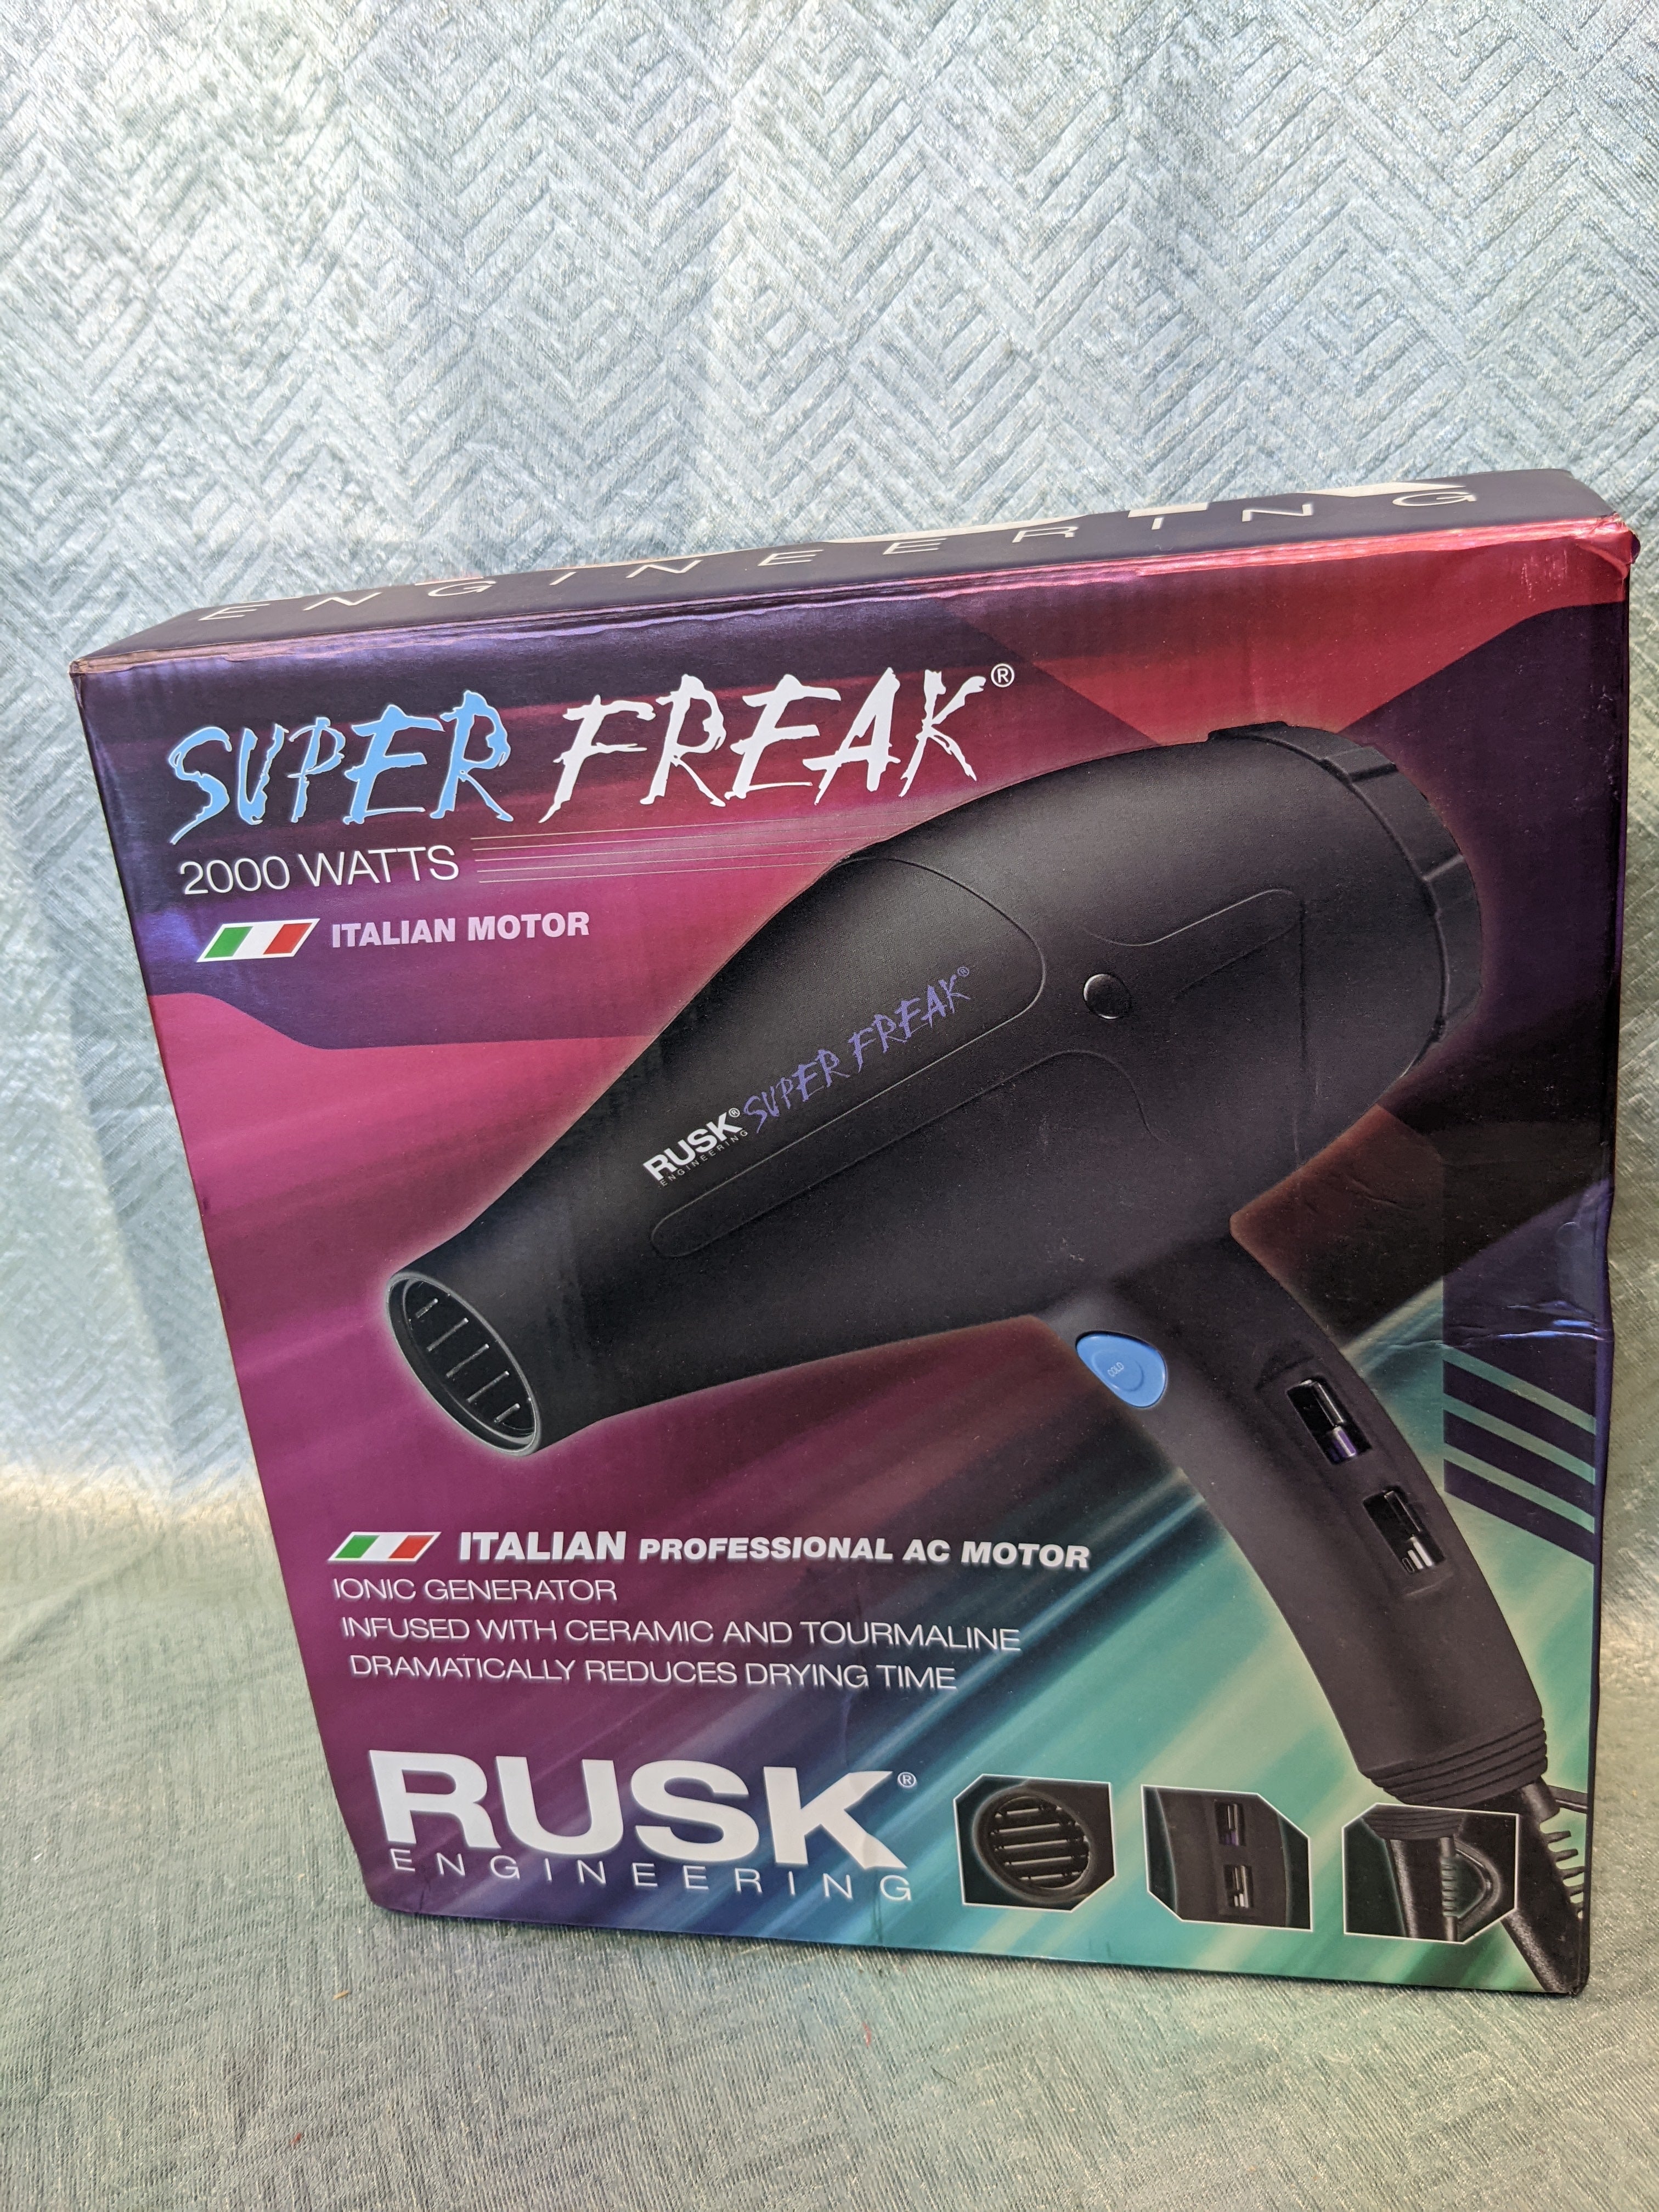 Rusk Engineering Super Freak Professional 2000 Watt Dryer with Italian Motor, Features and Italian Motor that Delivers Superior Airflow and Air Pressure (7594285072622)